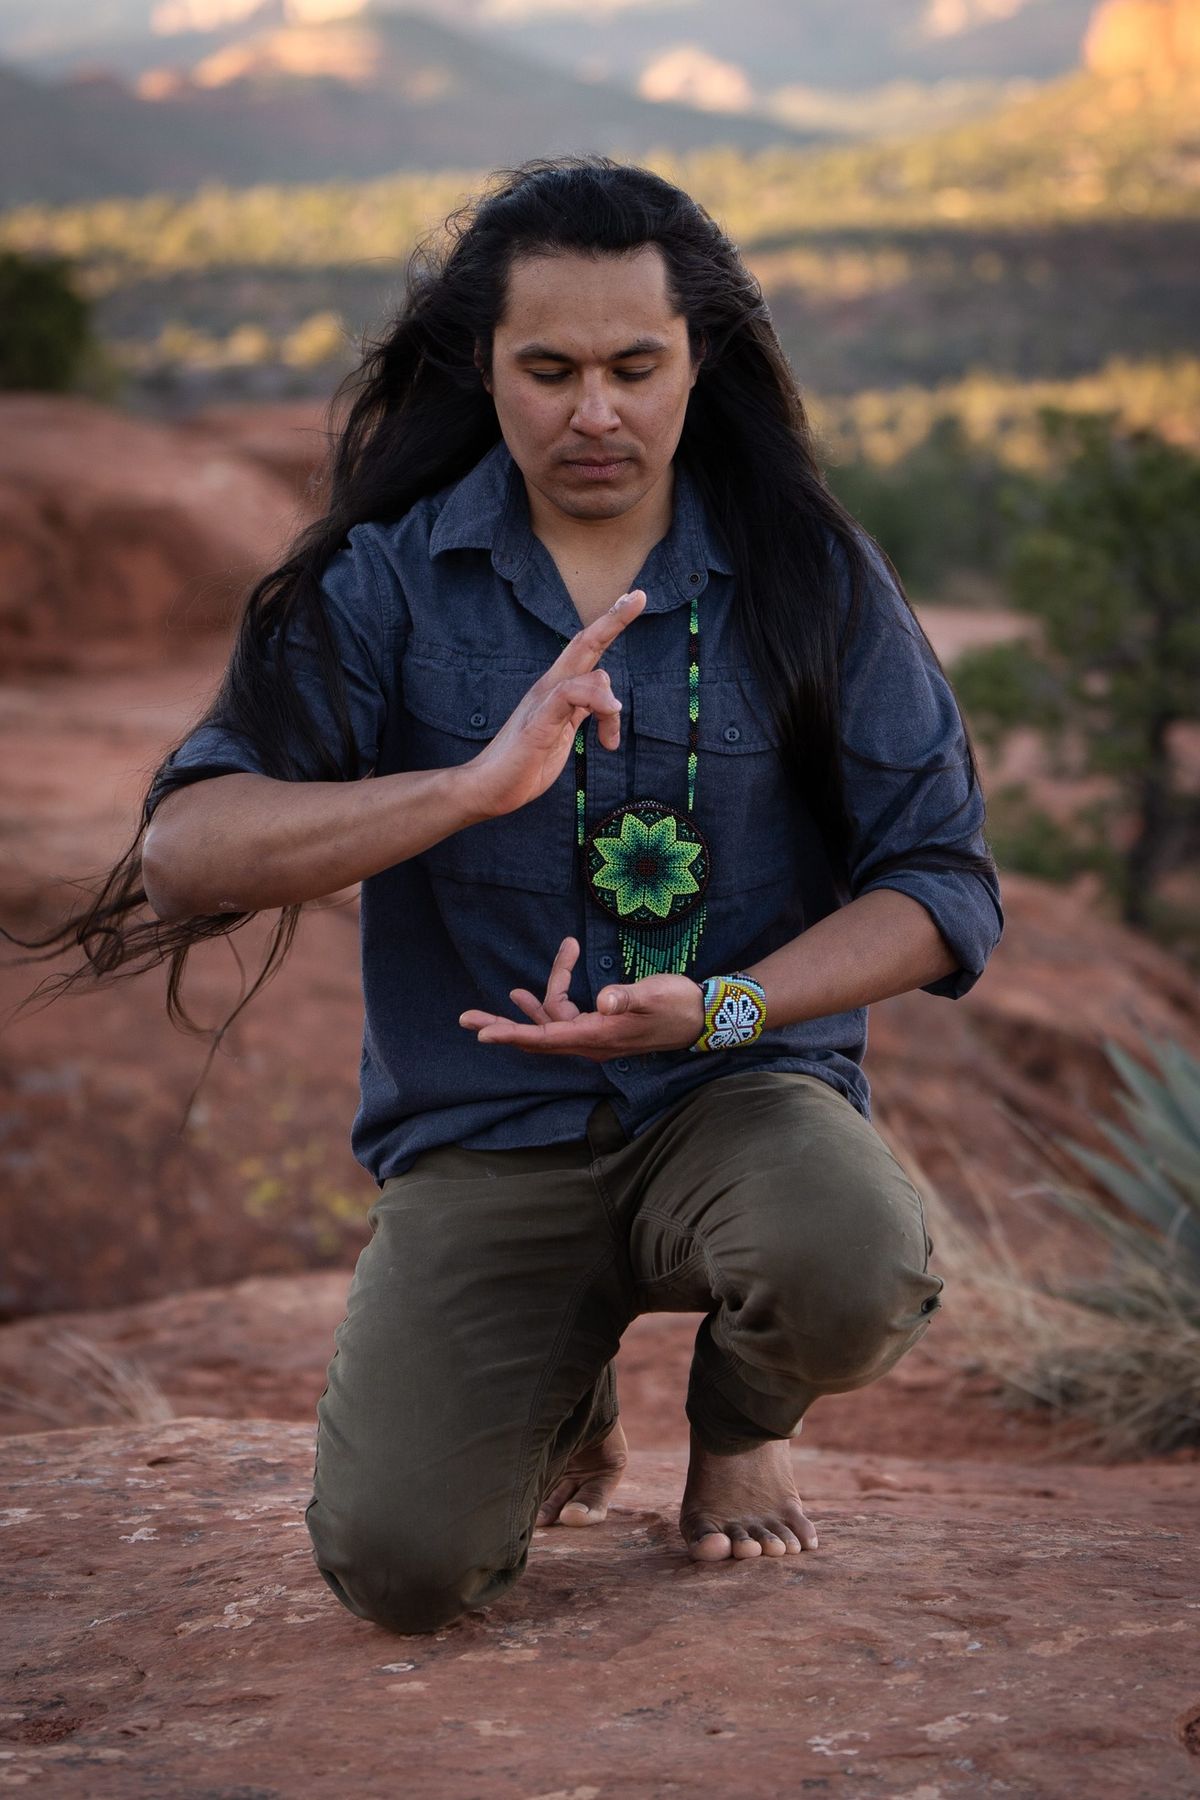 The Physicist and the Shaman: Lecture, Meditation, and Film